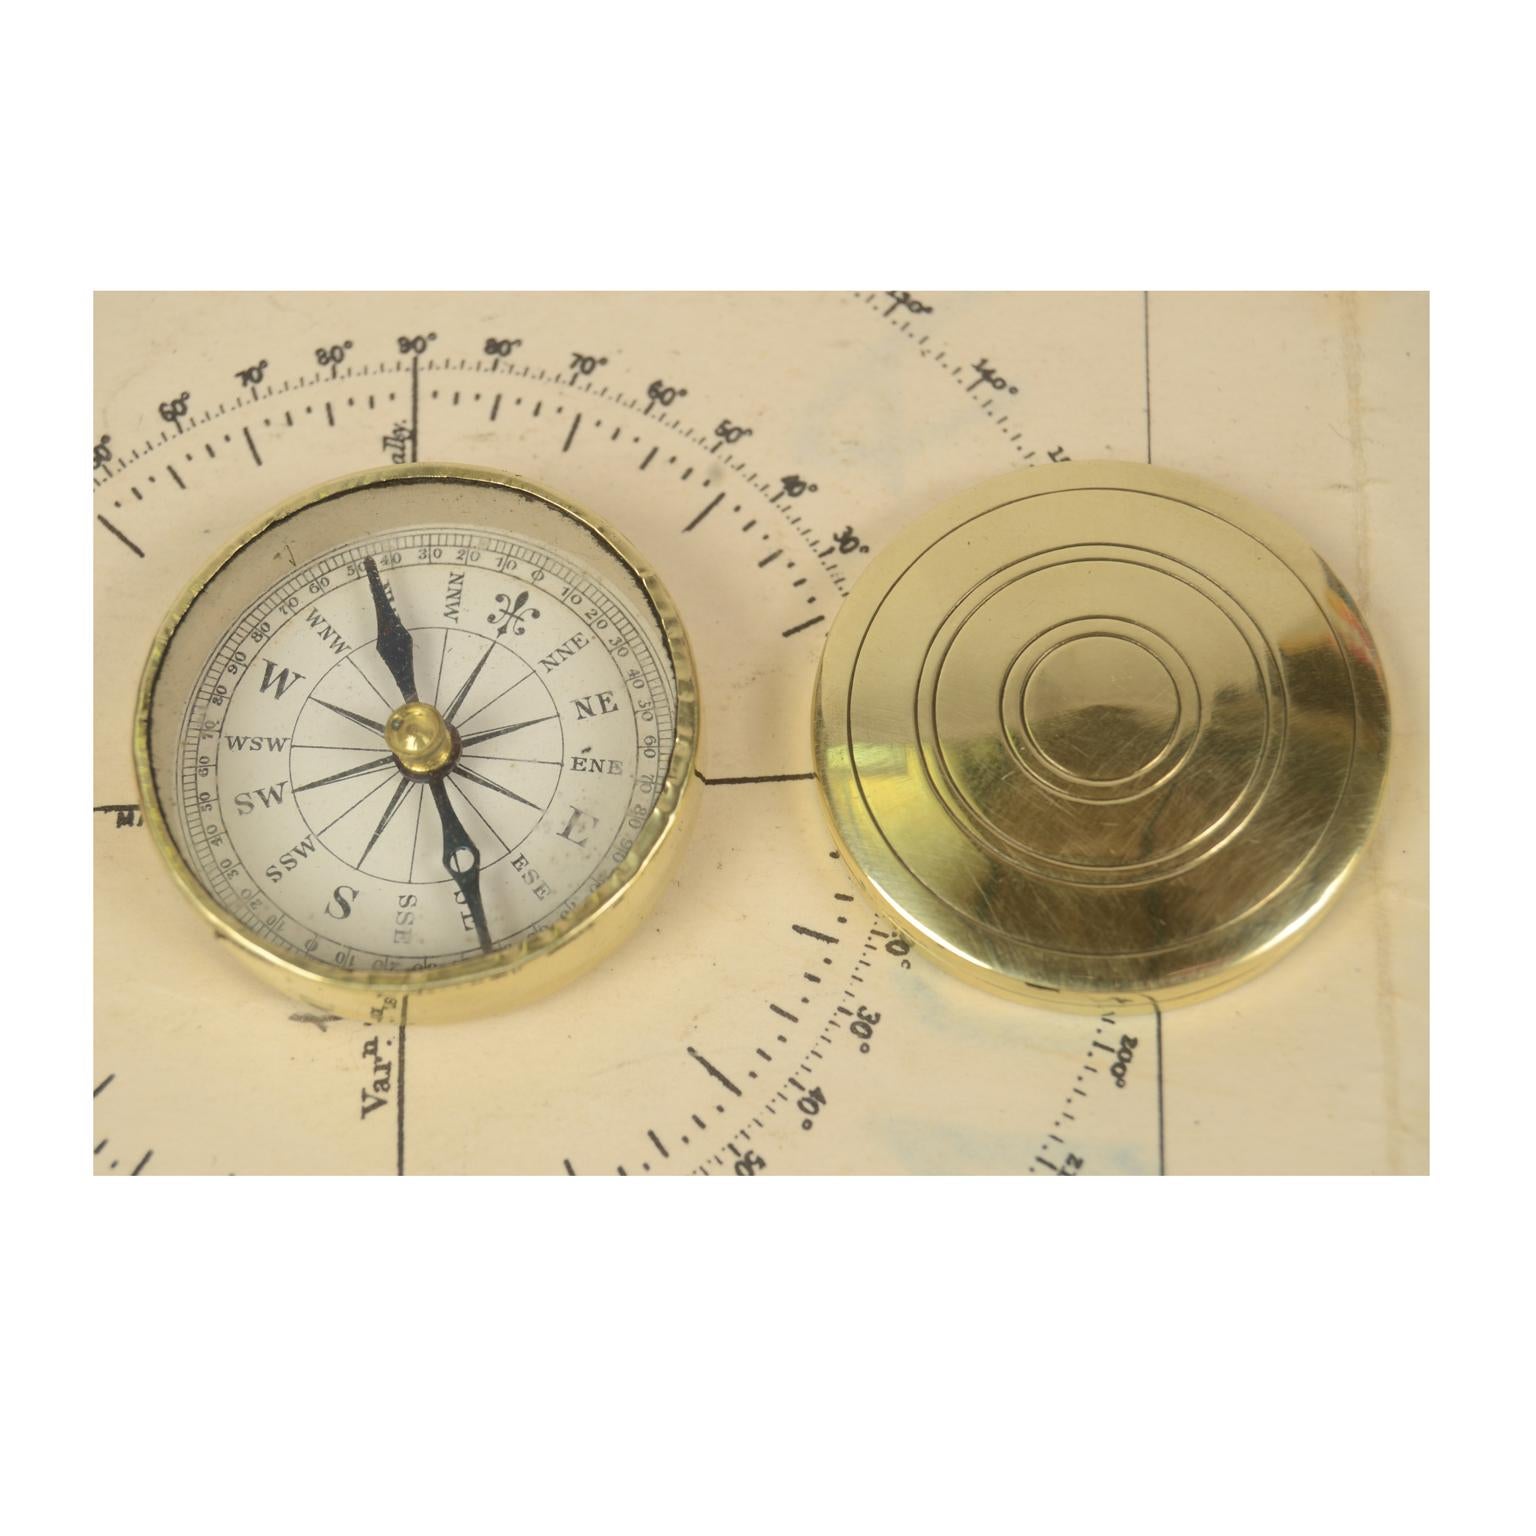 Small pocket compass for travelers, from the Victorian era, UK late 19th century, of brass, compass card on paper with sixteen winds, complete with goniometric circle. In excellent condition and in perfect working order. Compass diameter 3.5 cm,